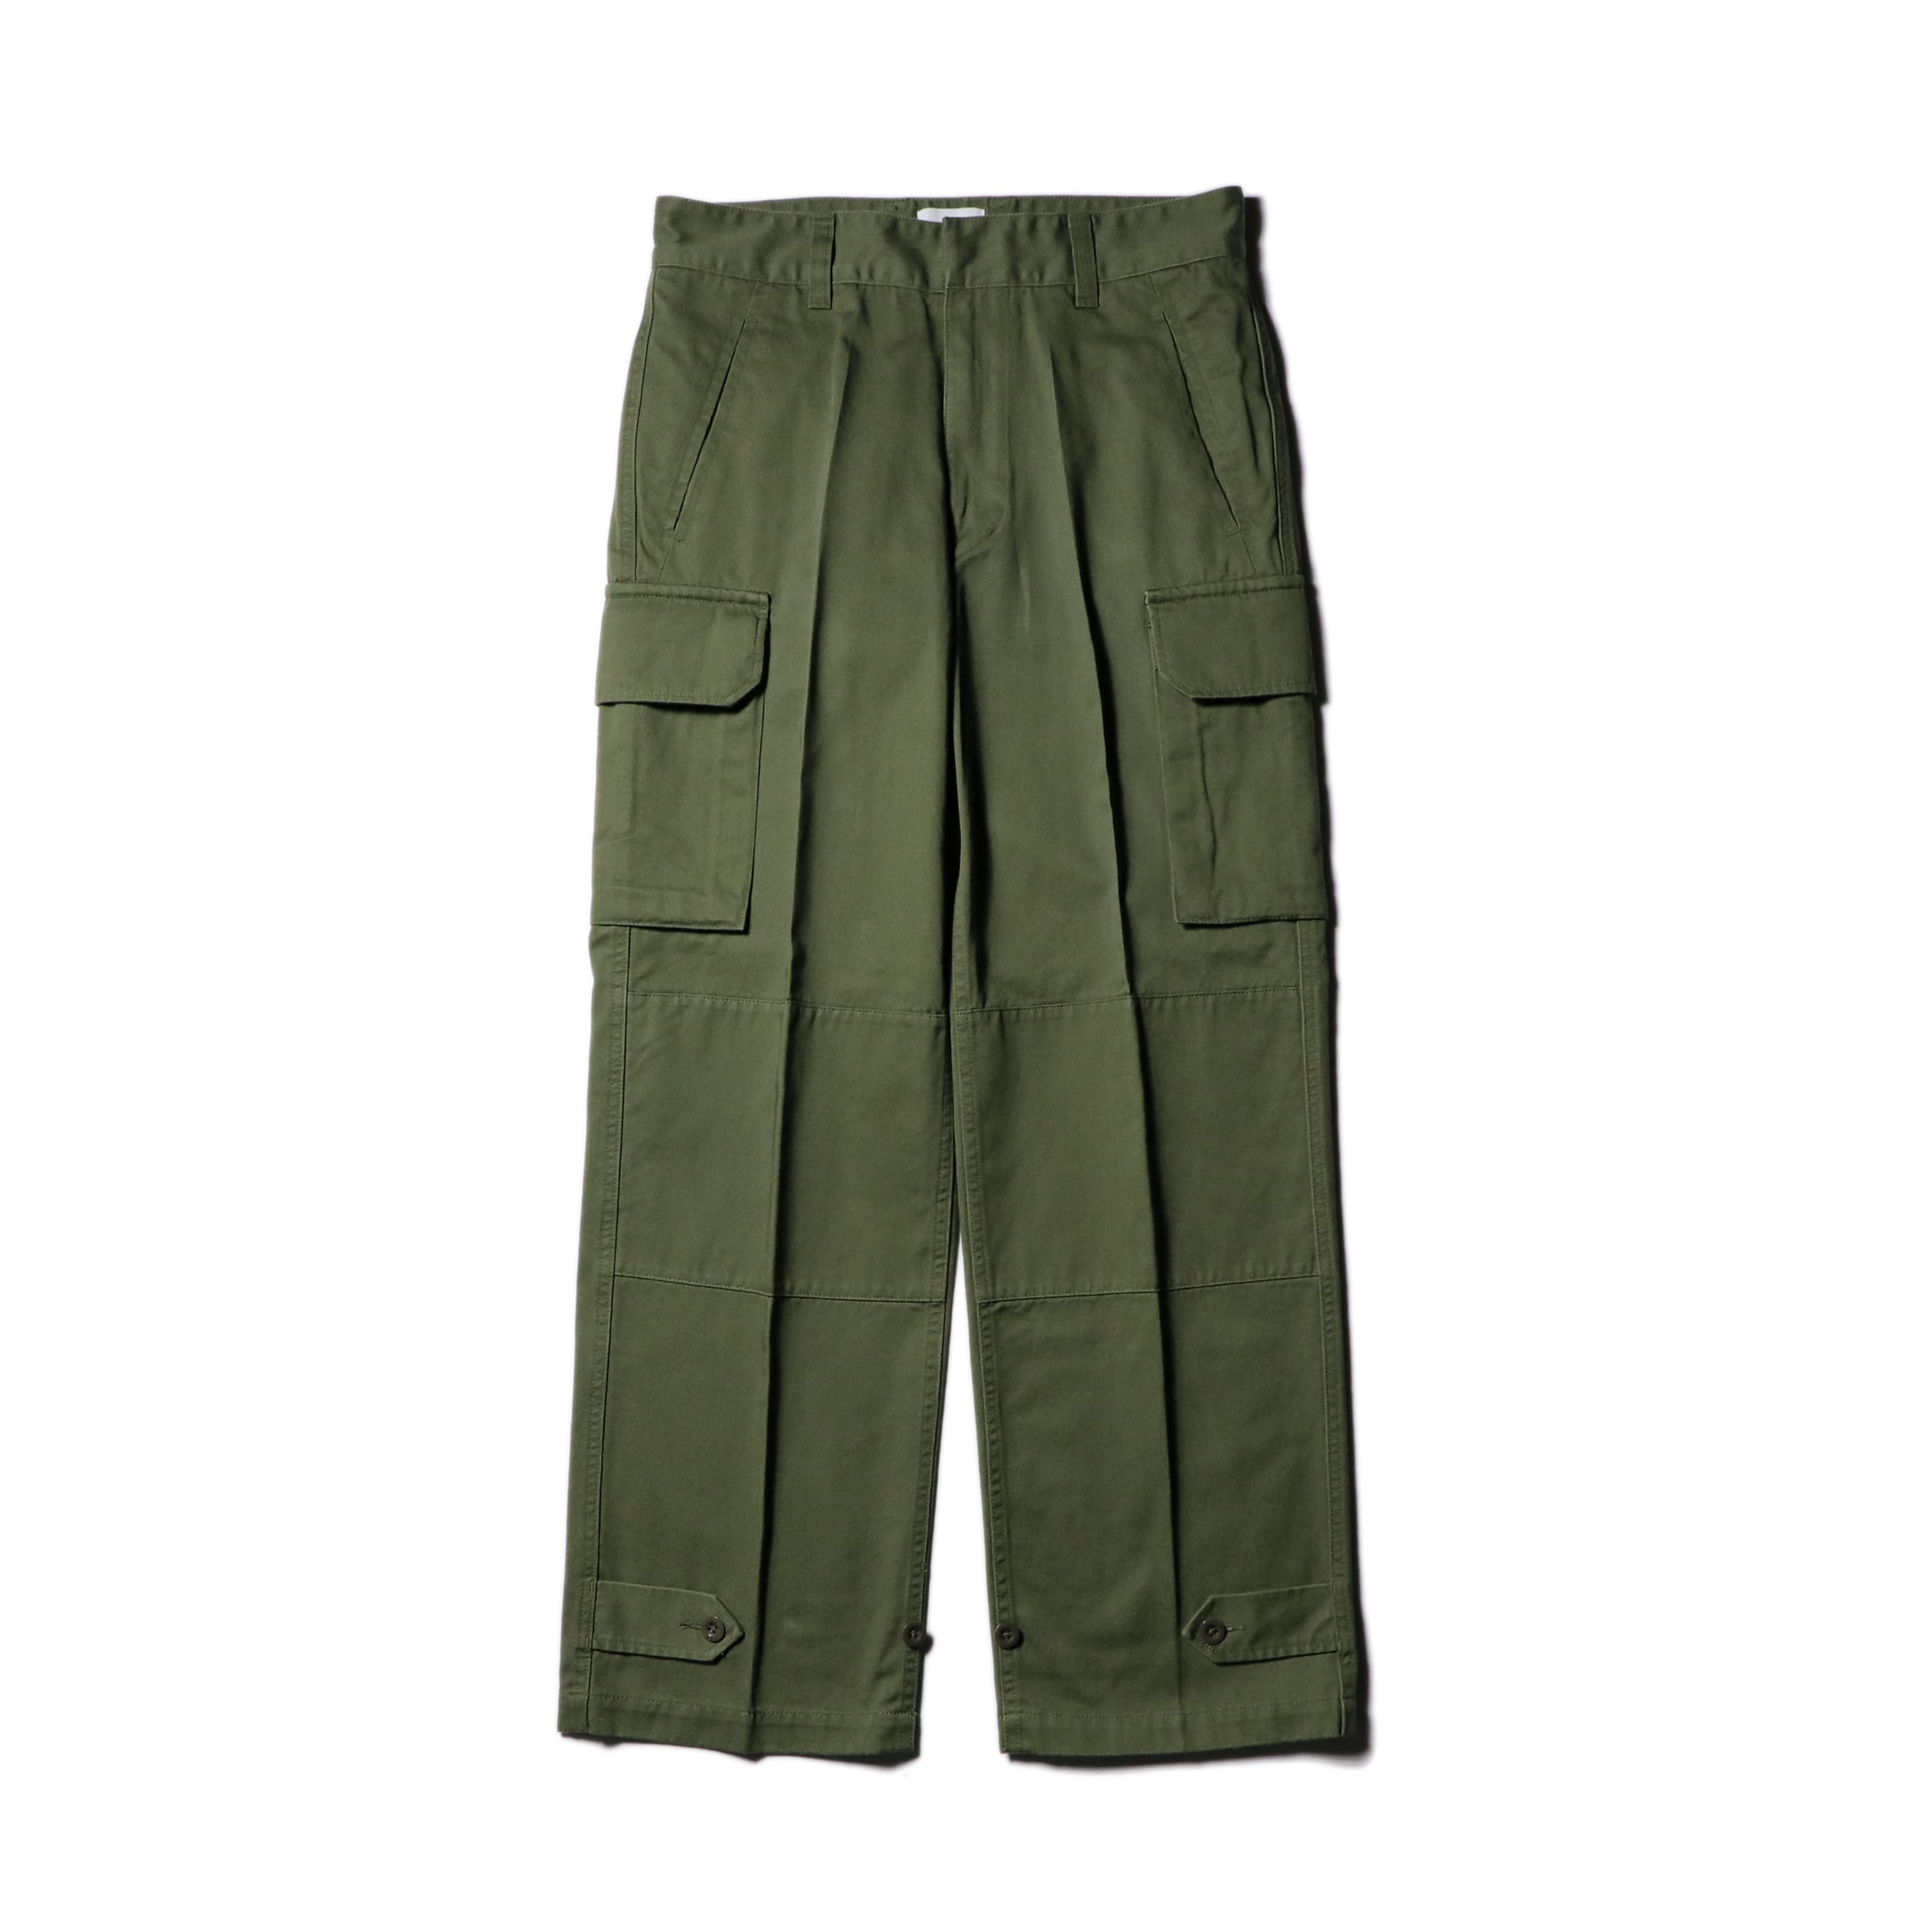 Improved M-47 cargo trouser